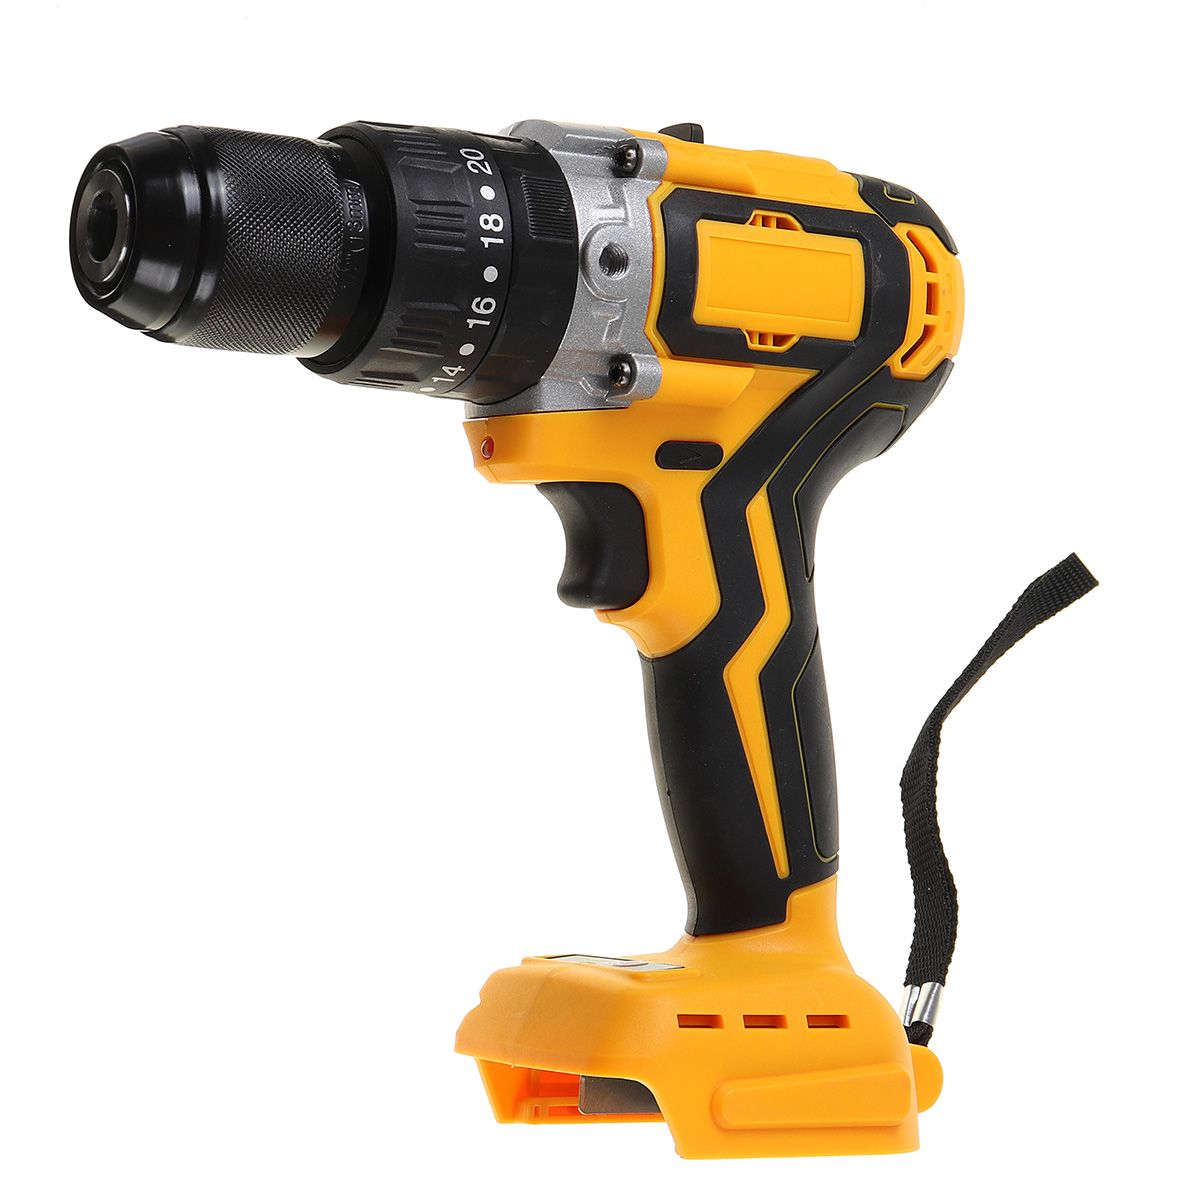 Brushless-Li-ion-Battery-Drill-Industry-Household-2-Speed-Rechargable-Impact-Screw-Driver-Drill-Adap-1674760